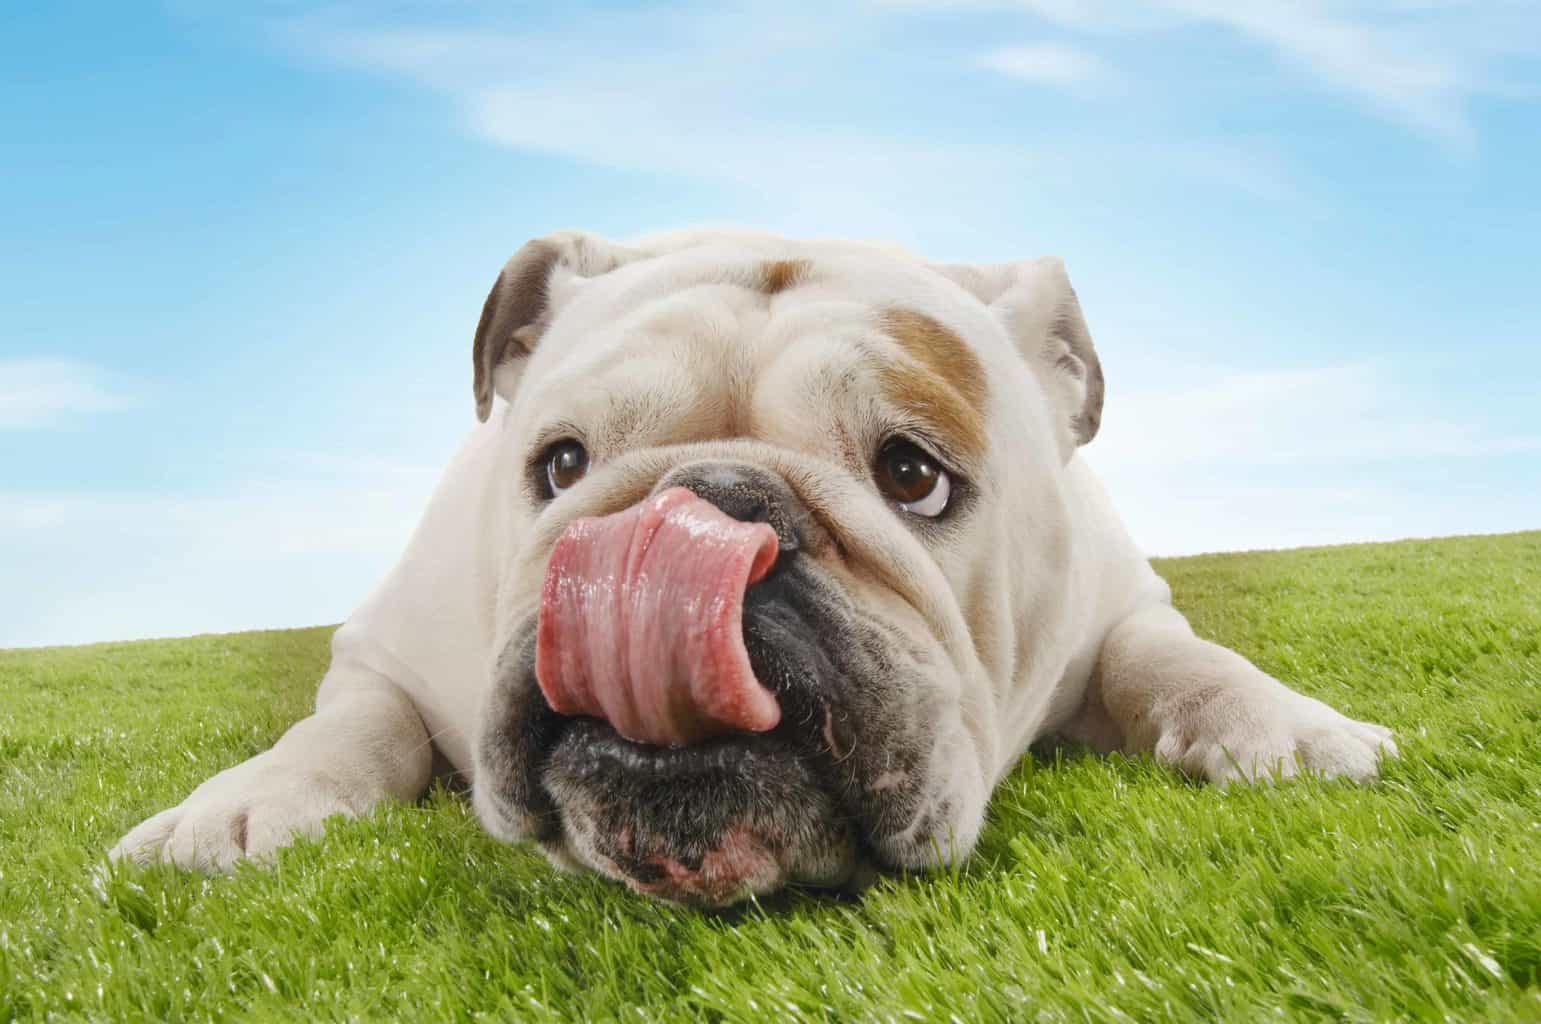 Happy bulldog licks nose while lying on artificial turf.